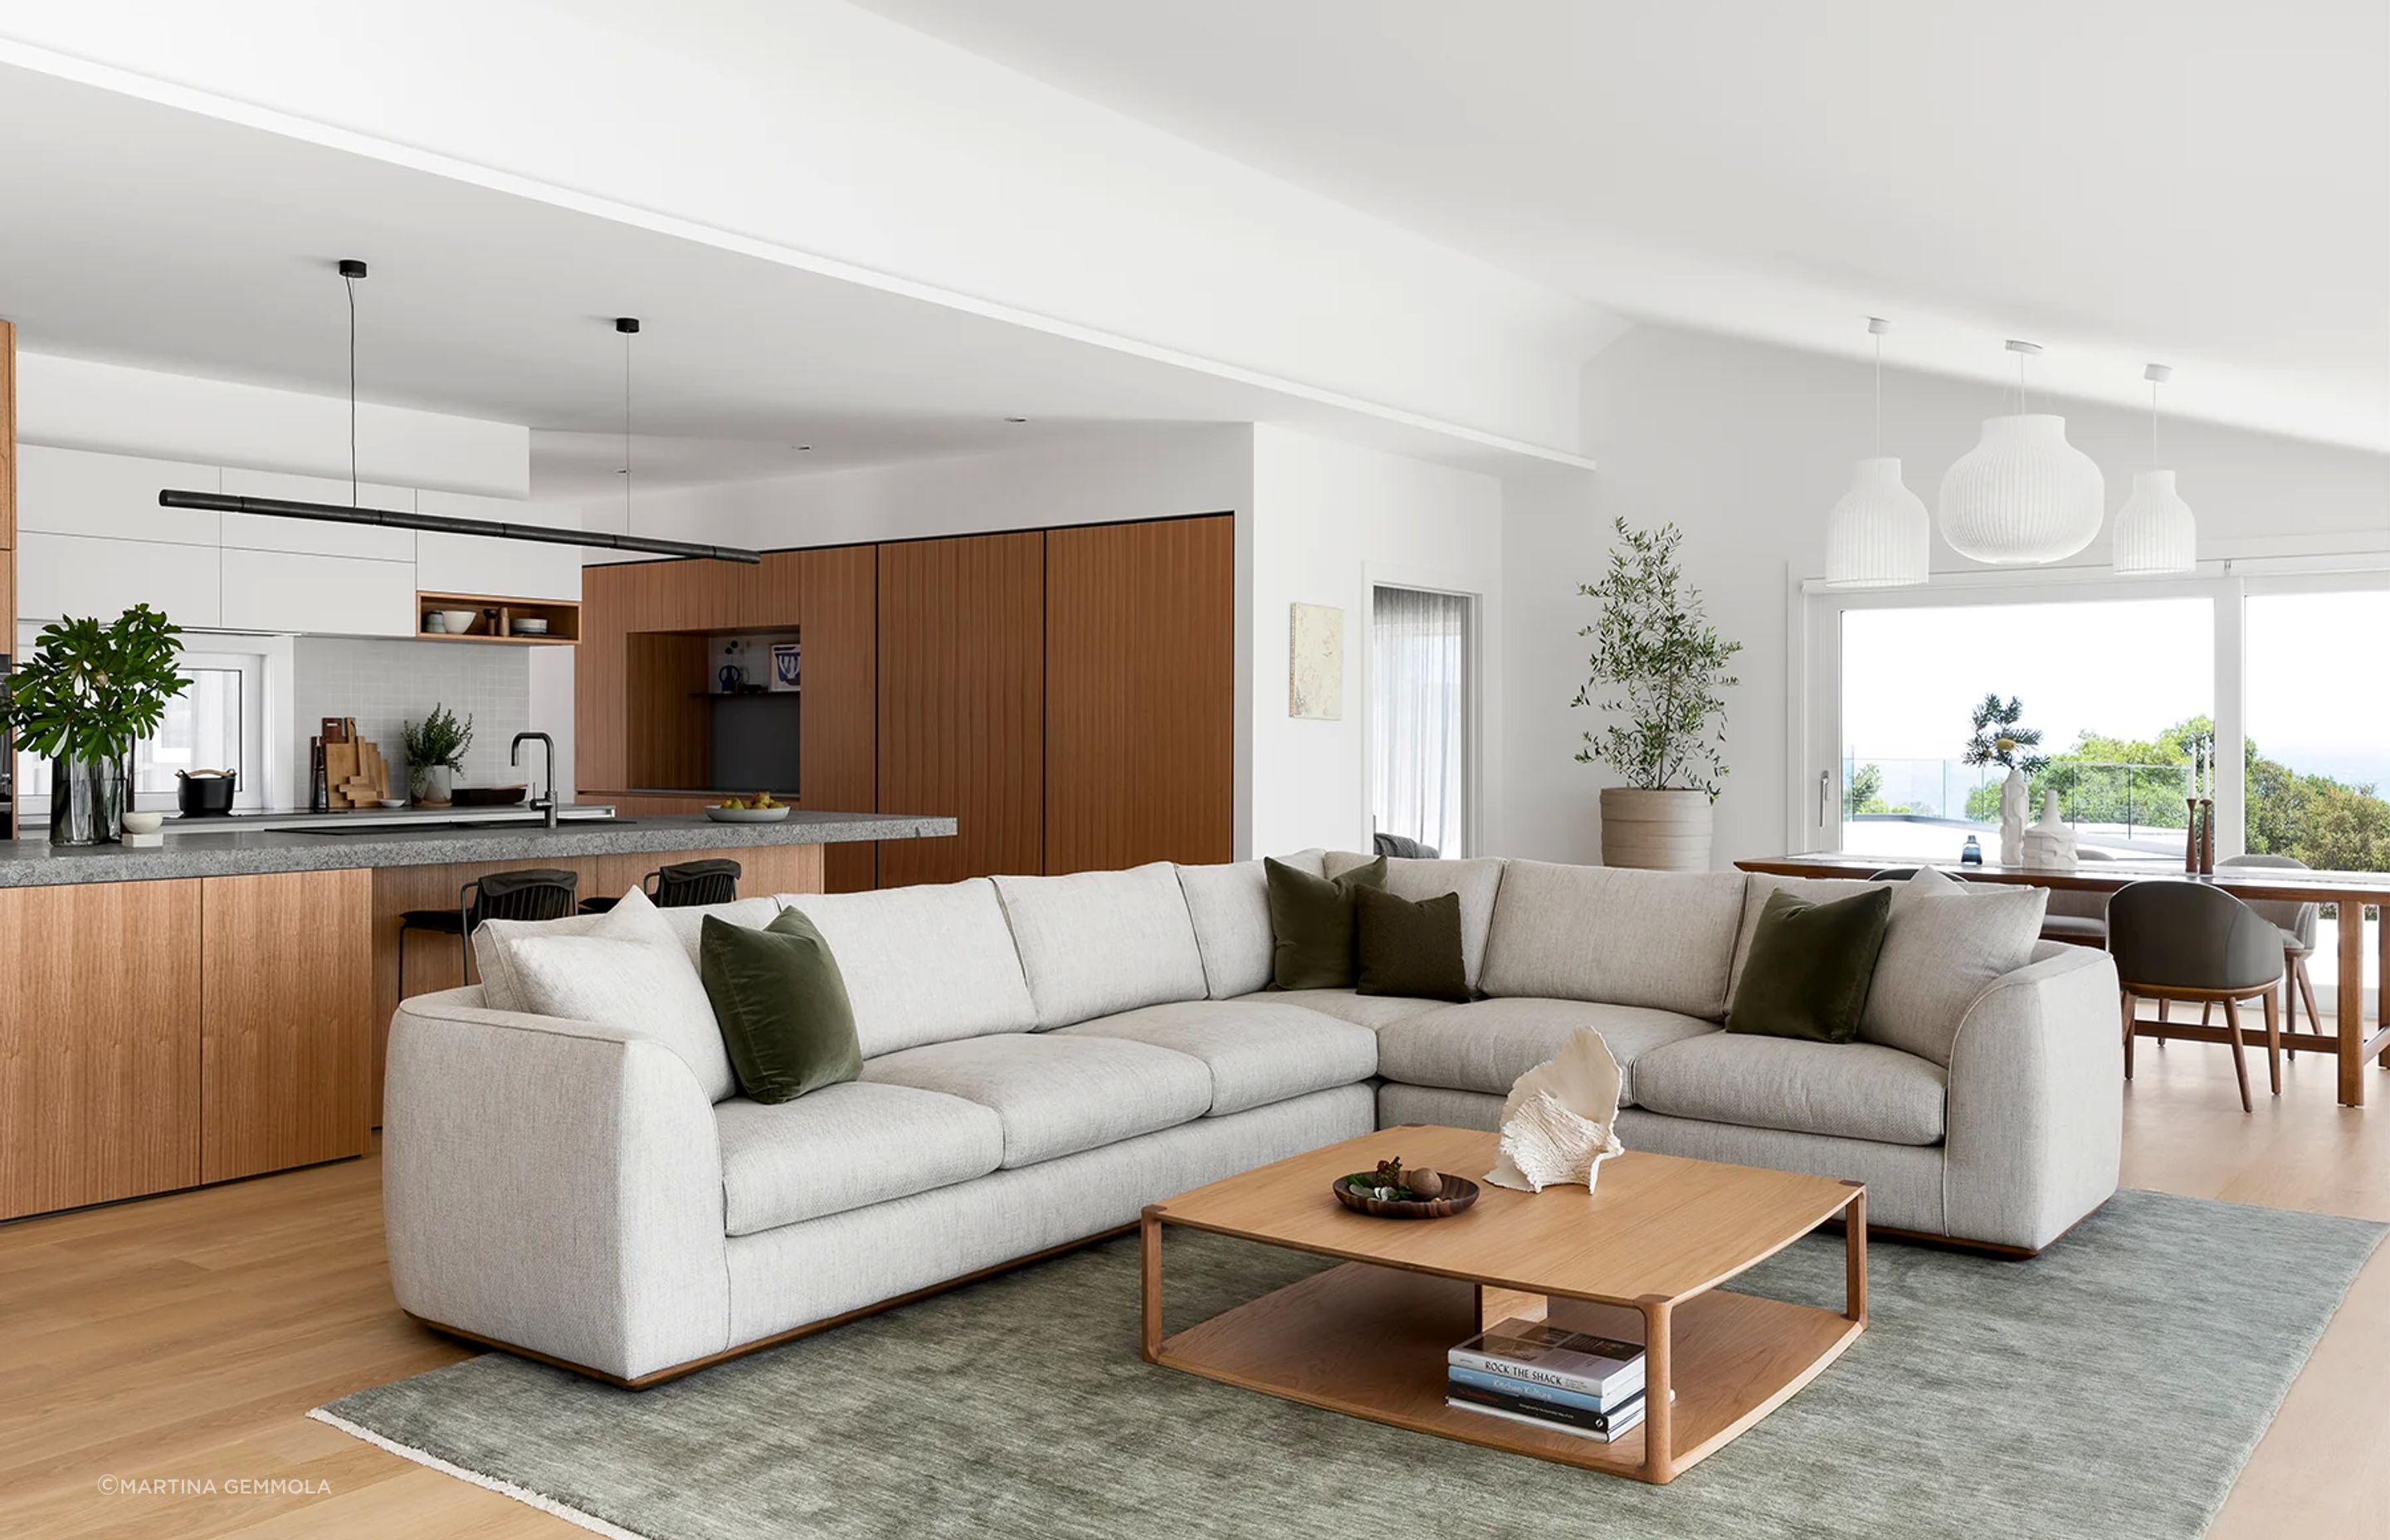 This Erskine Sofa features soft upholstery and a rounded silhouette. Featured here in the Cape Schanck project designed by Rod Hannah Design Group and Cantilever Interiors.